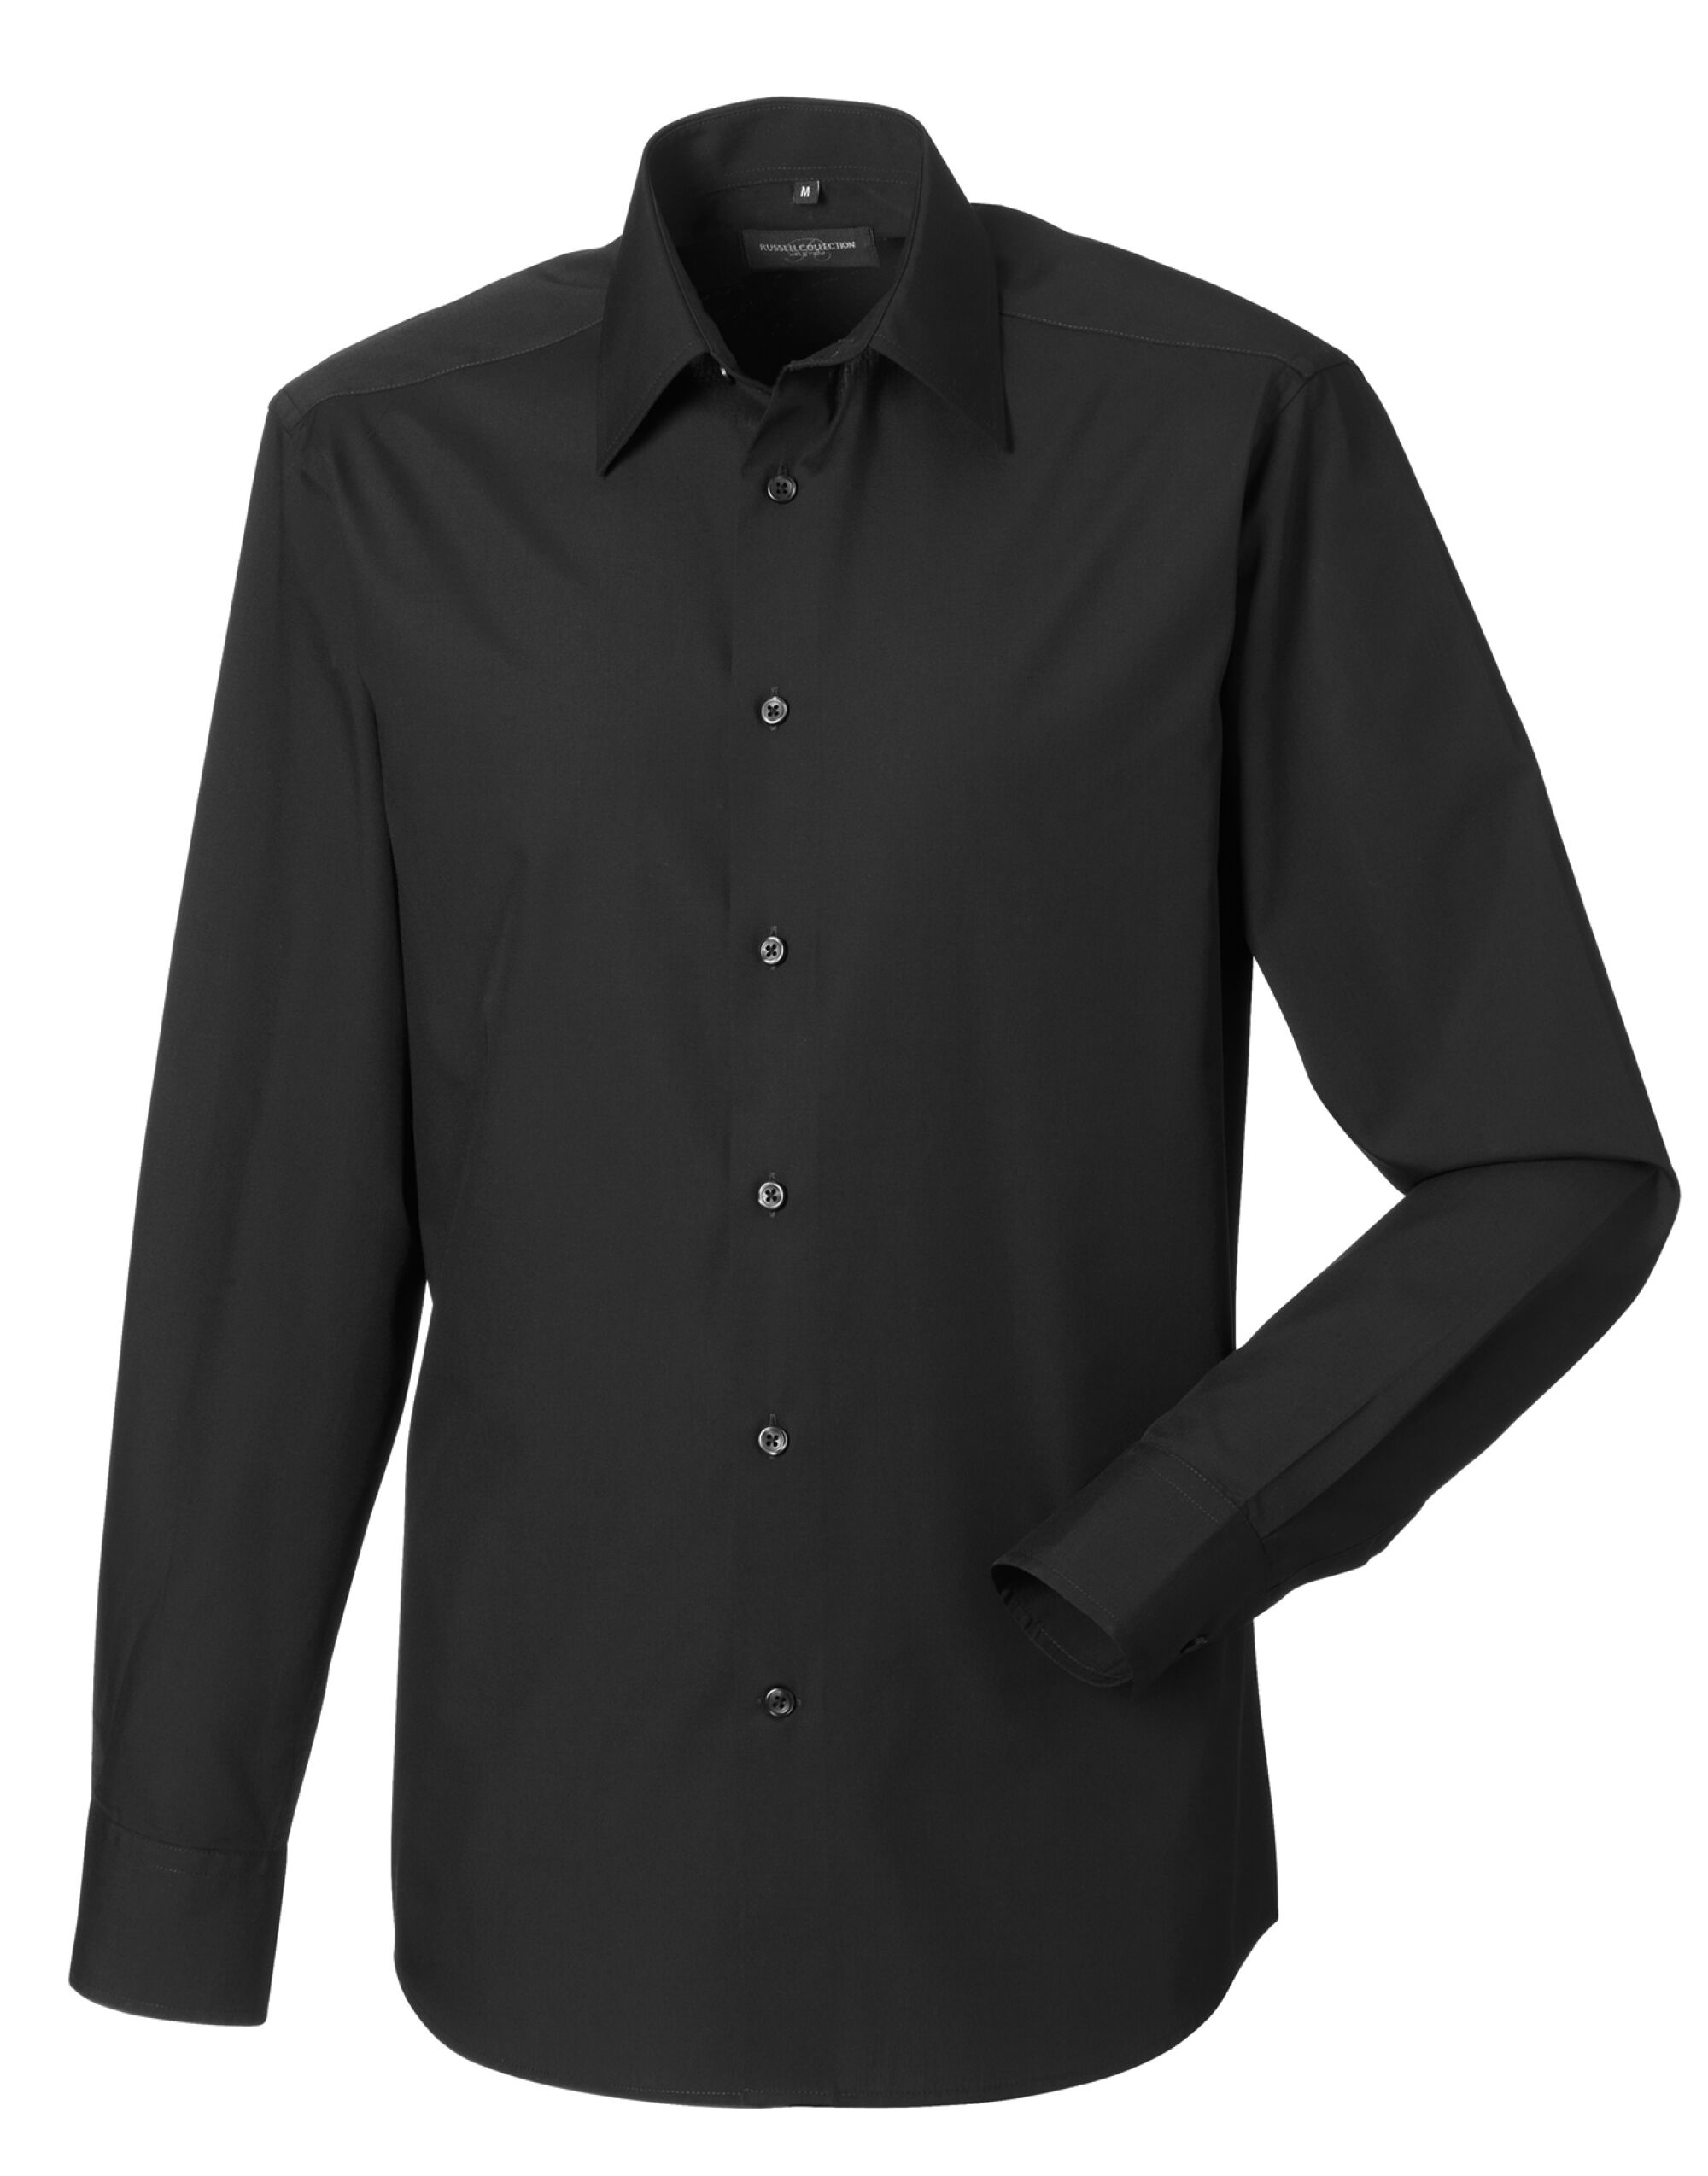 Picture of Men's Long Sleeve Tailored Polycotton Poplin Shirt